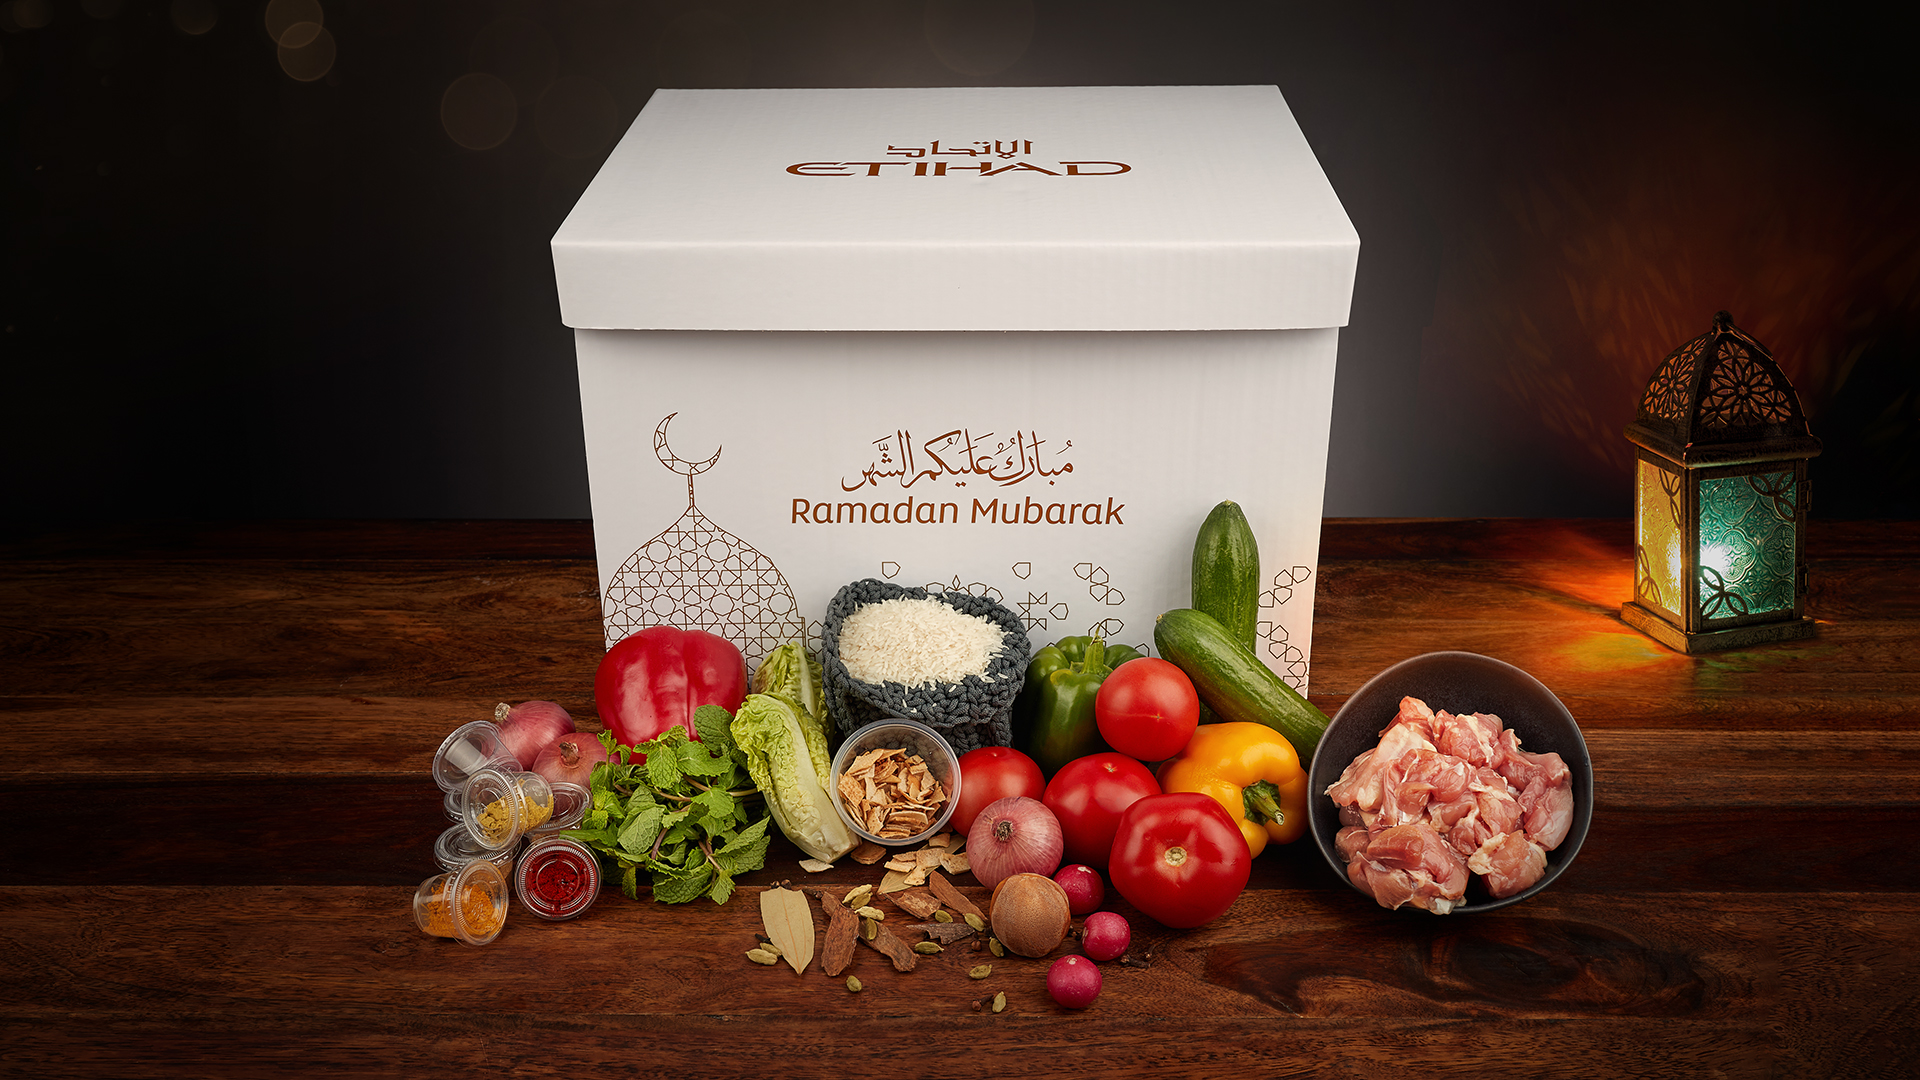 Etihad Airways Will Distribute Ramadan Boxes To Those Affected By COVID-19